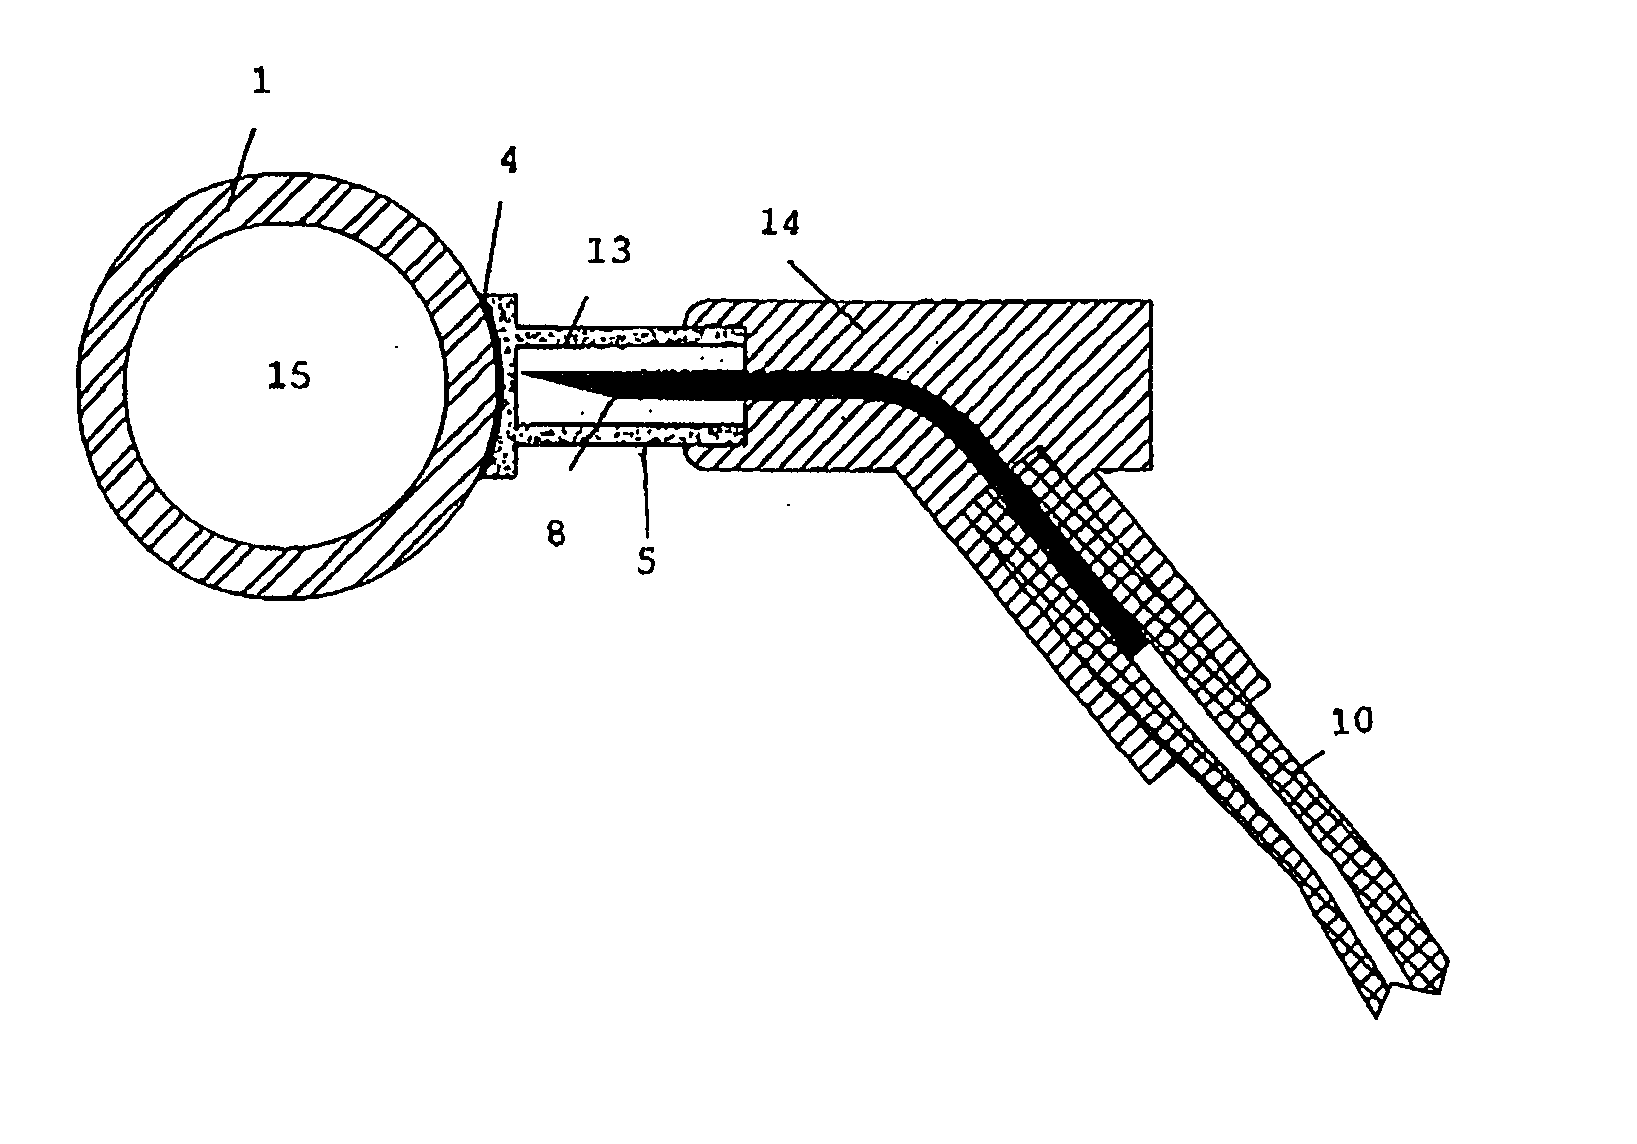 Apparatus for removing samples from systems having flexible walls and for introducing fluids into the same